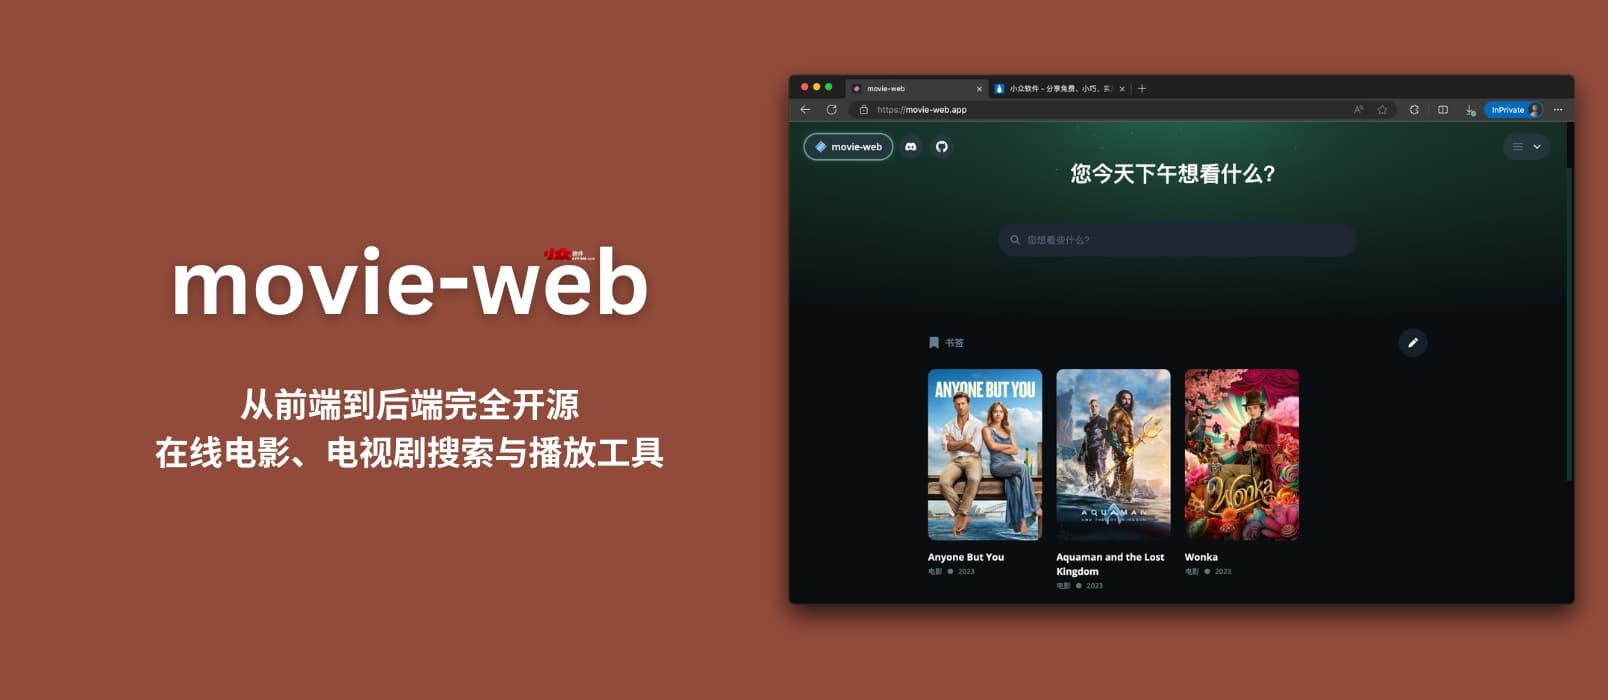 movie-web - An Open Source Online Movie and TV Show Search and Streaming Tool